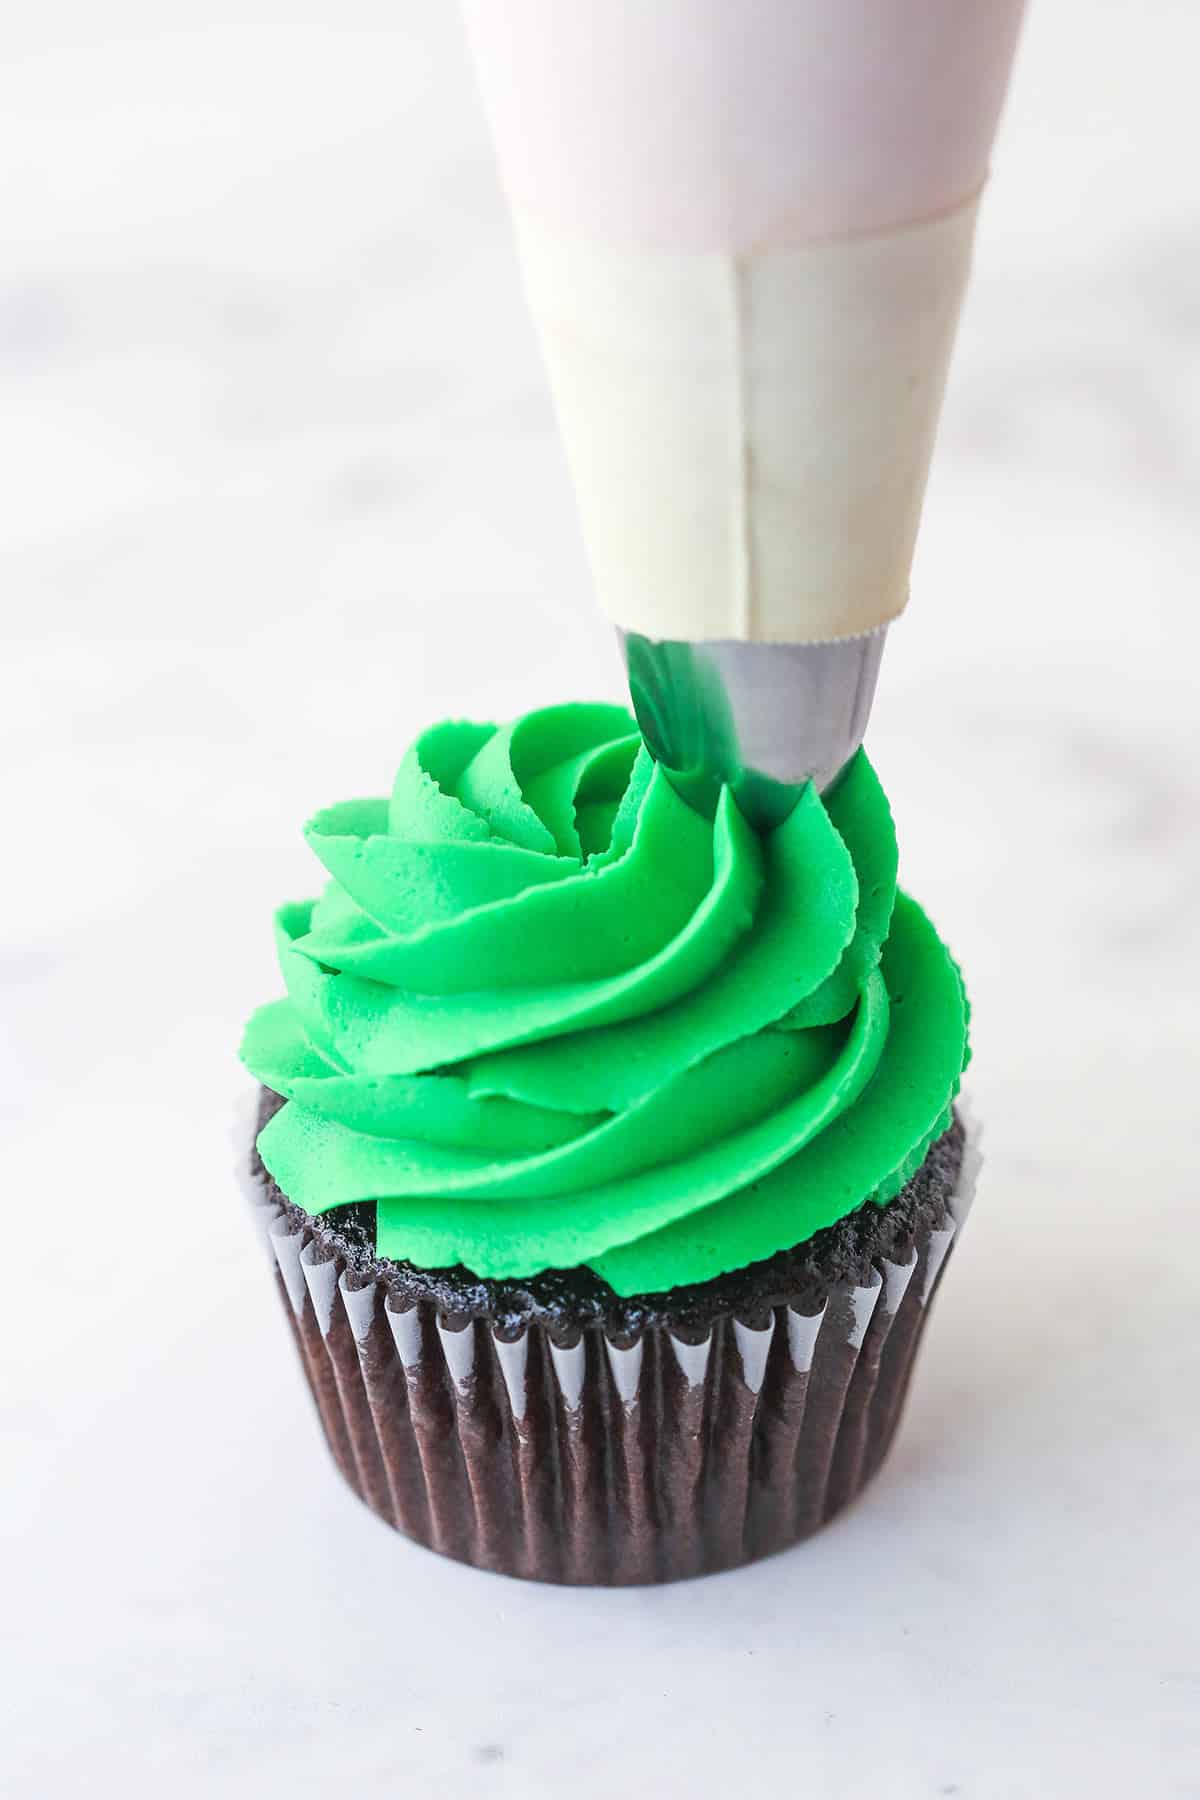 piping the green buttercream onto the cupcake for the christmas tree cupcakes